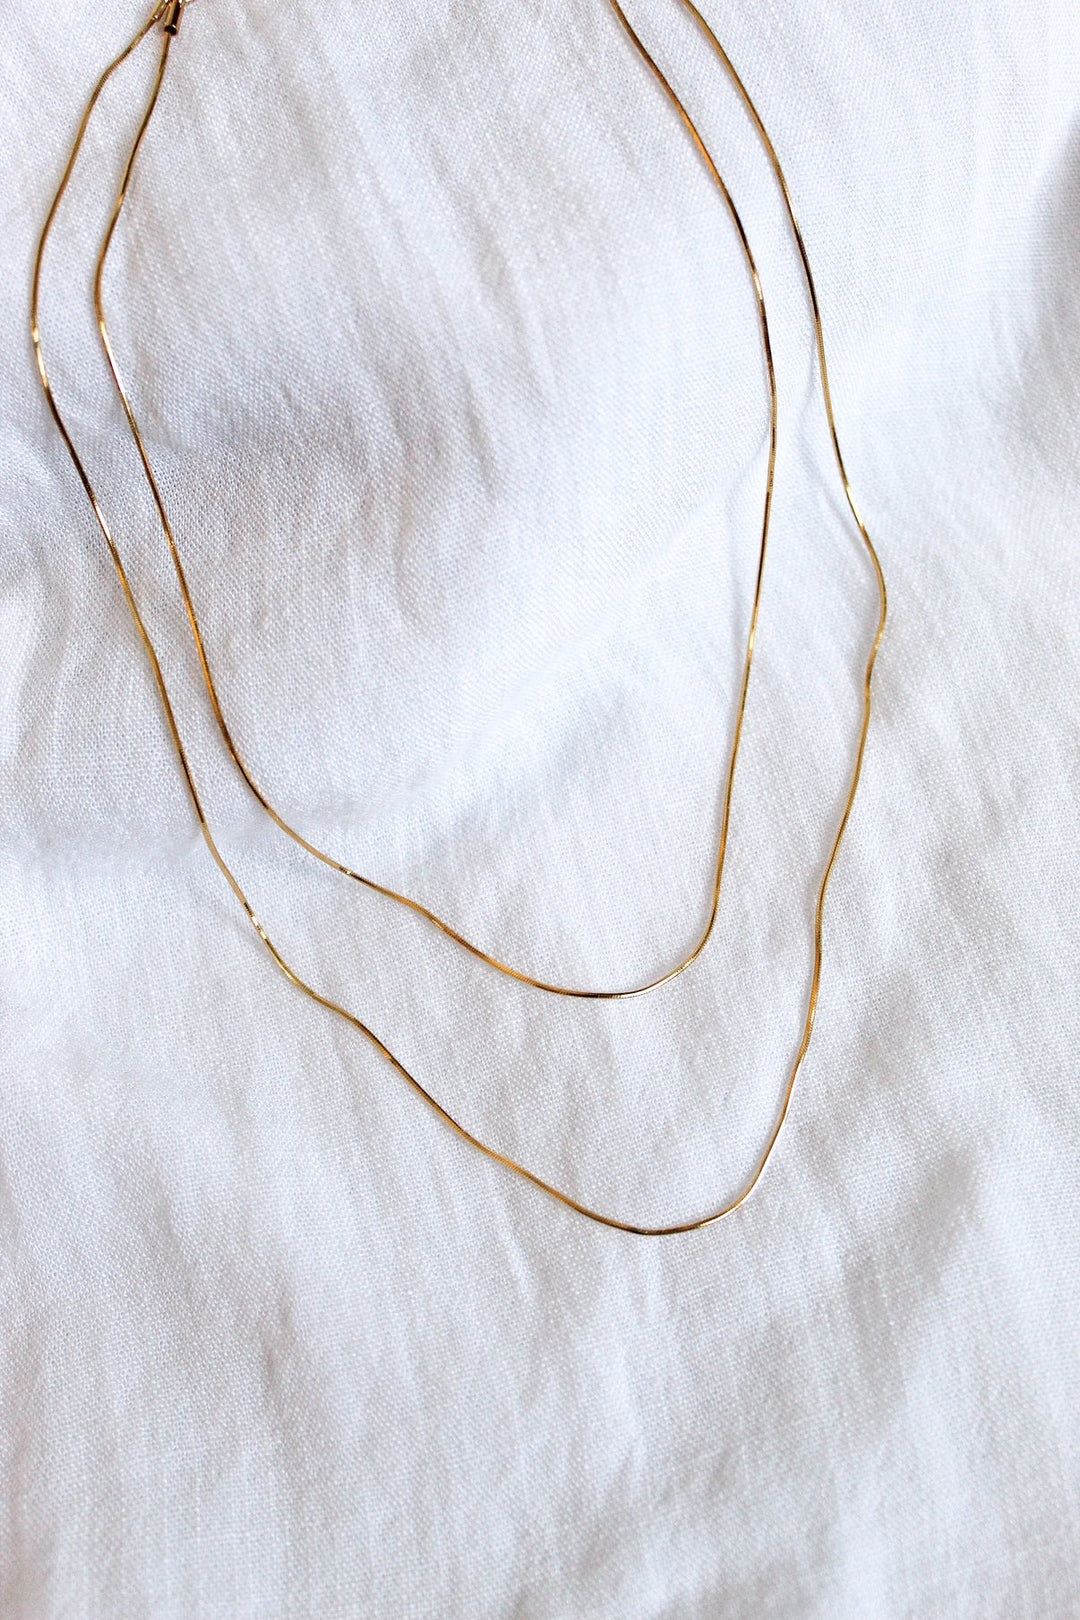 The Double Herring Thin Duo Necklace